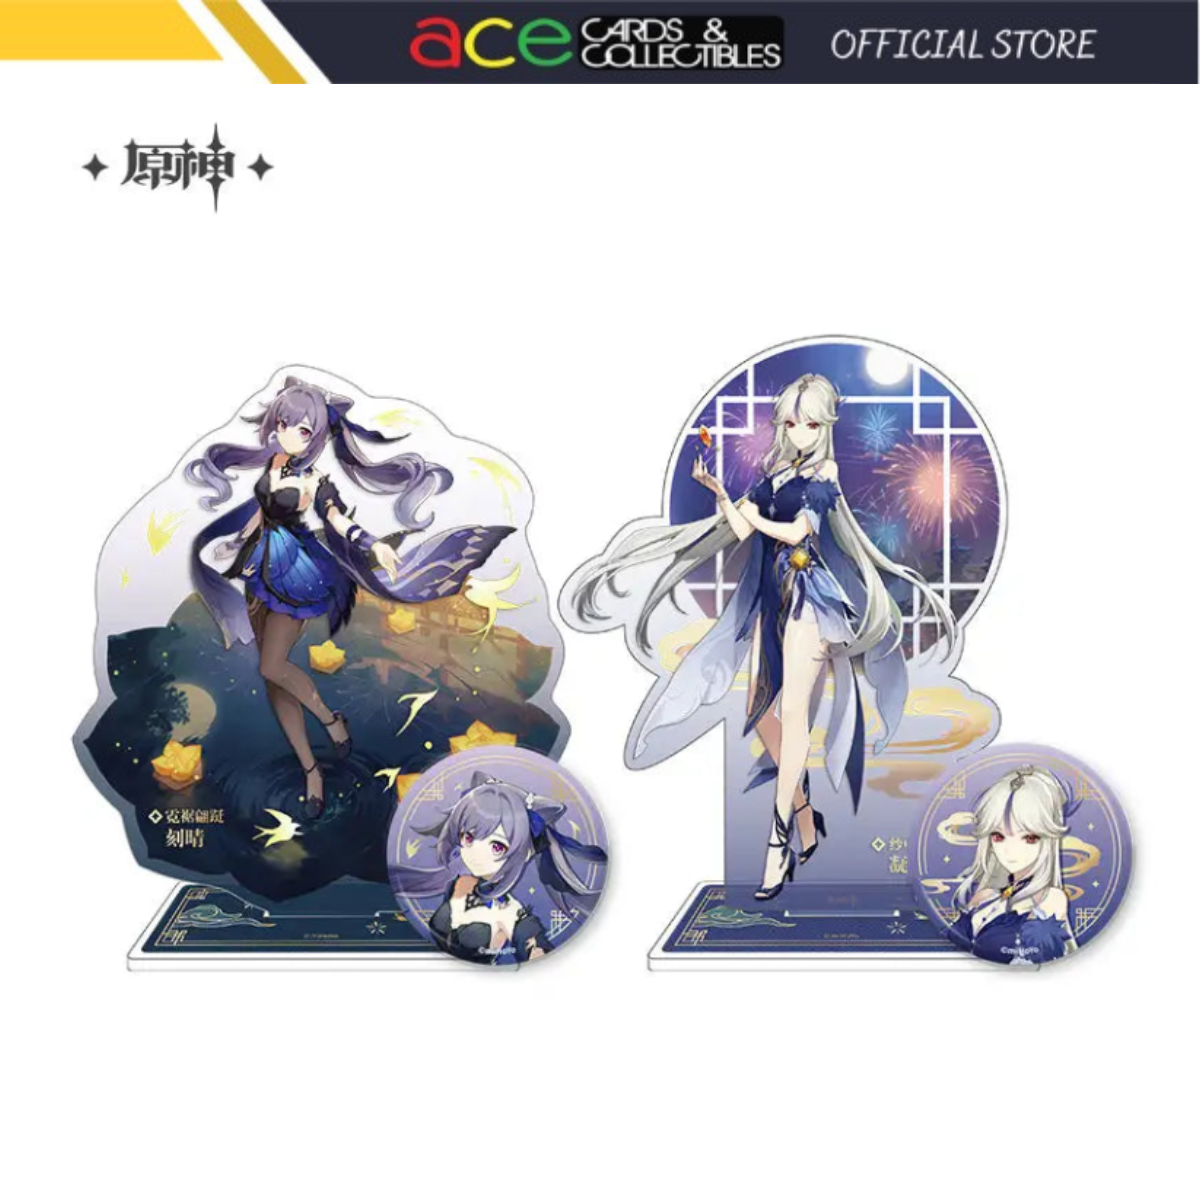 miHoYo Genshin Impact “Fleeting Colors in Flight” Collection: Badge & Acrylic Stand-Ningguang Orchid's Evening Gown - Acrylic Stand-miHoYo-Ace Cards & Collectibles